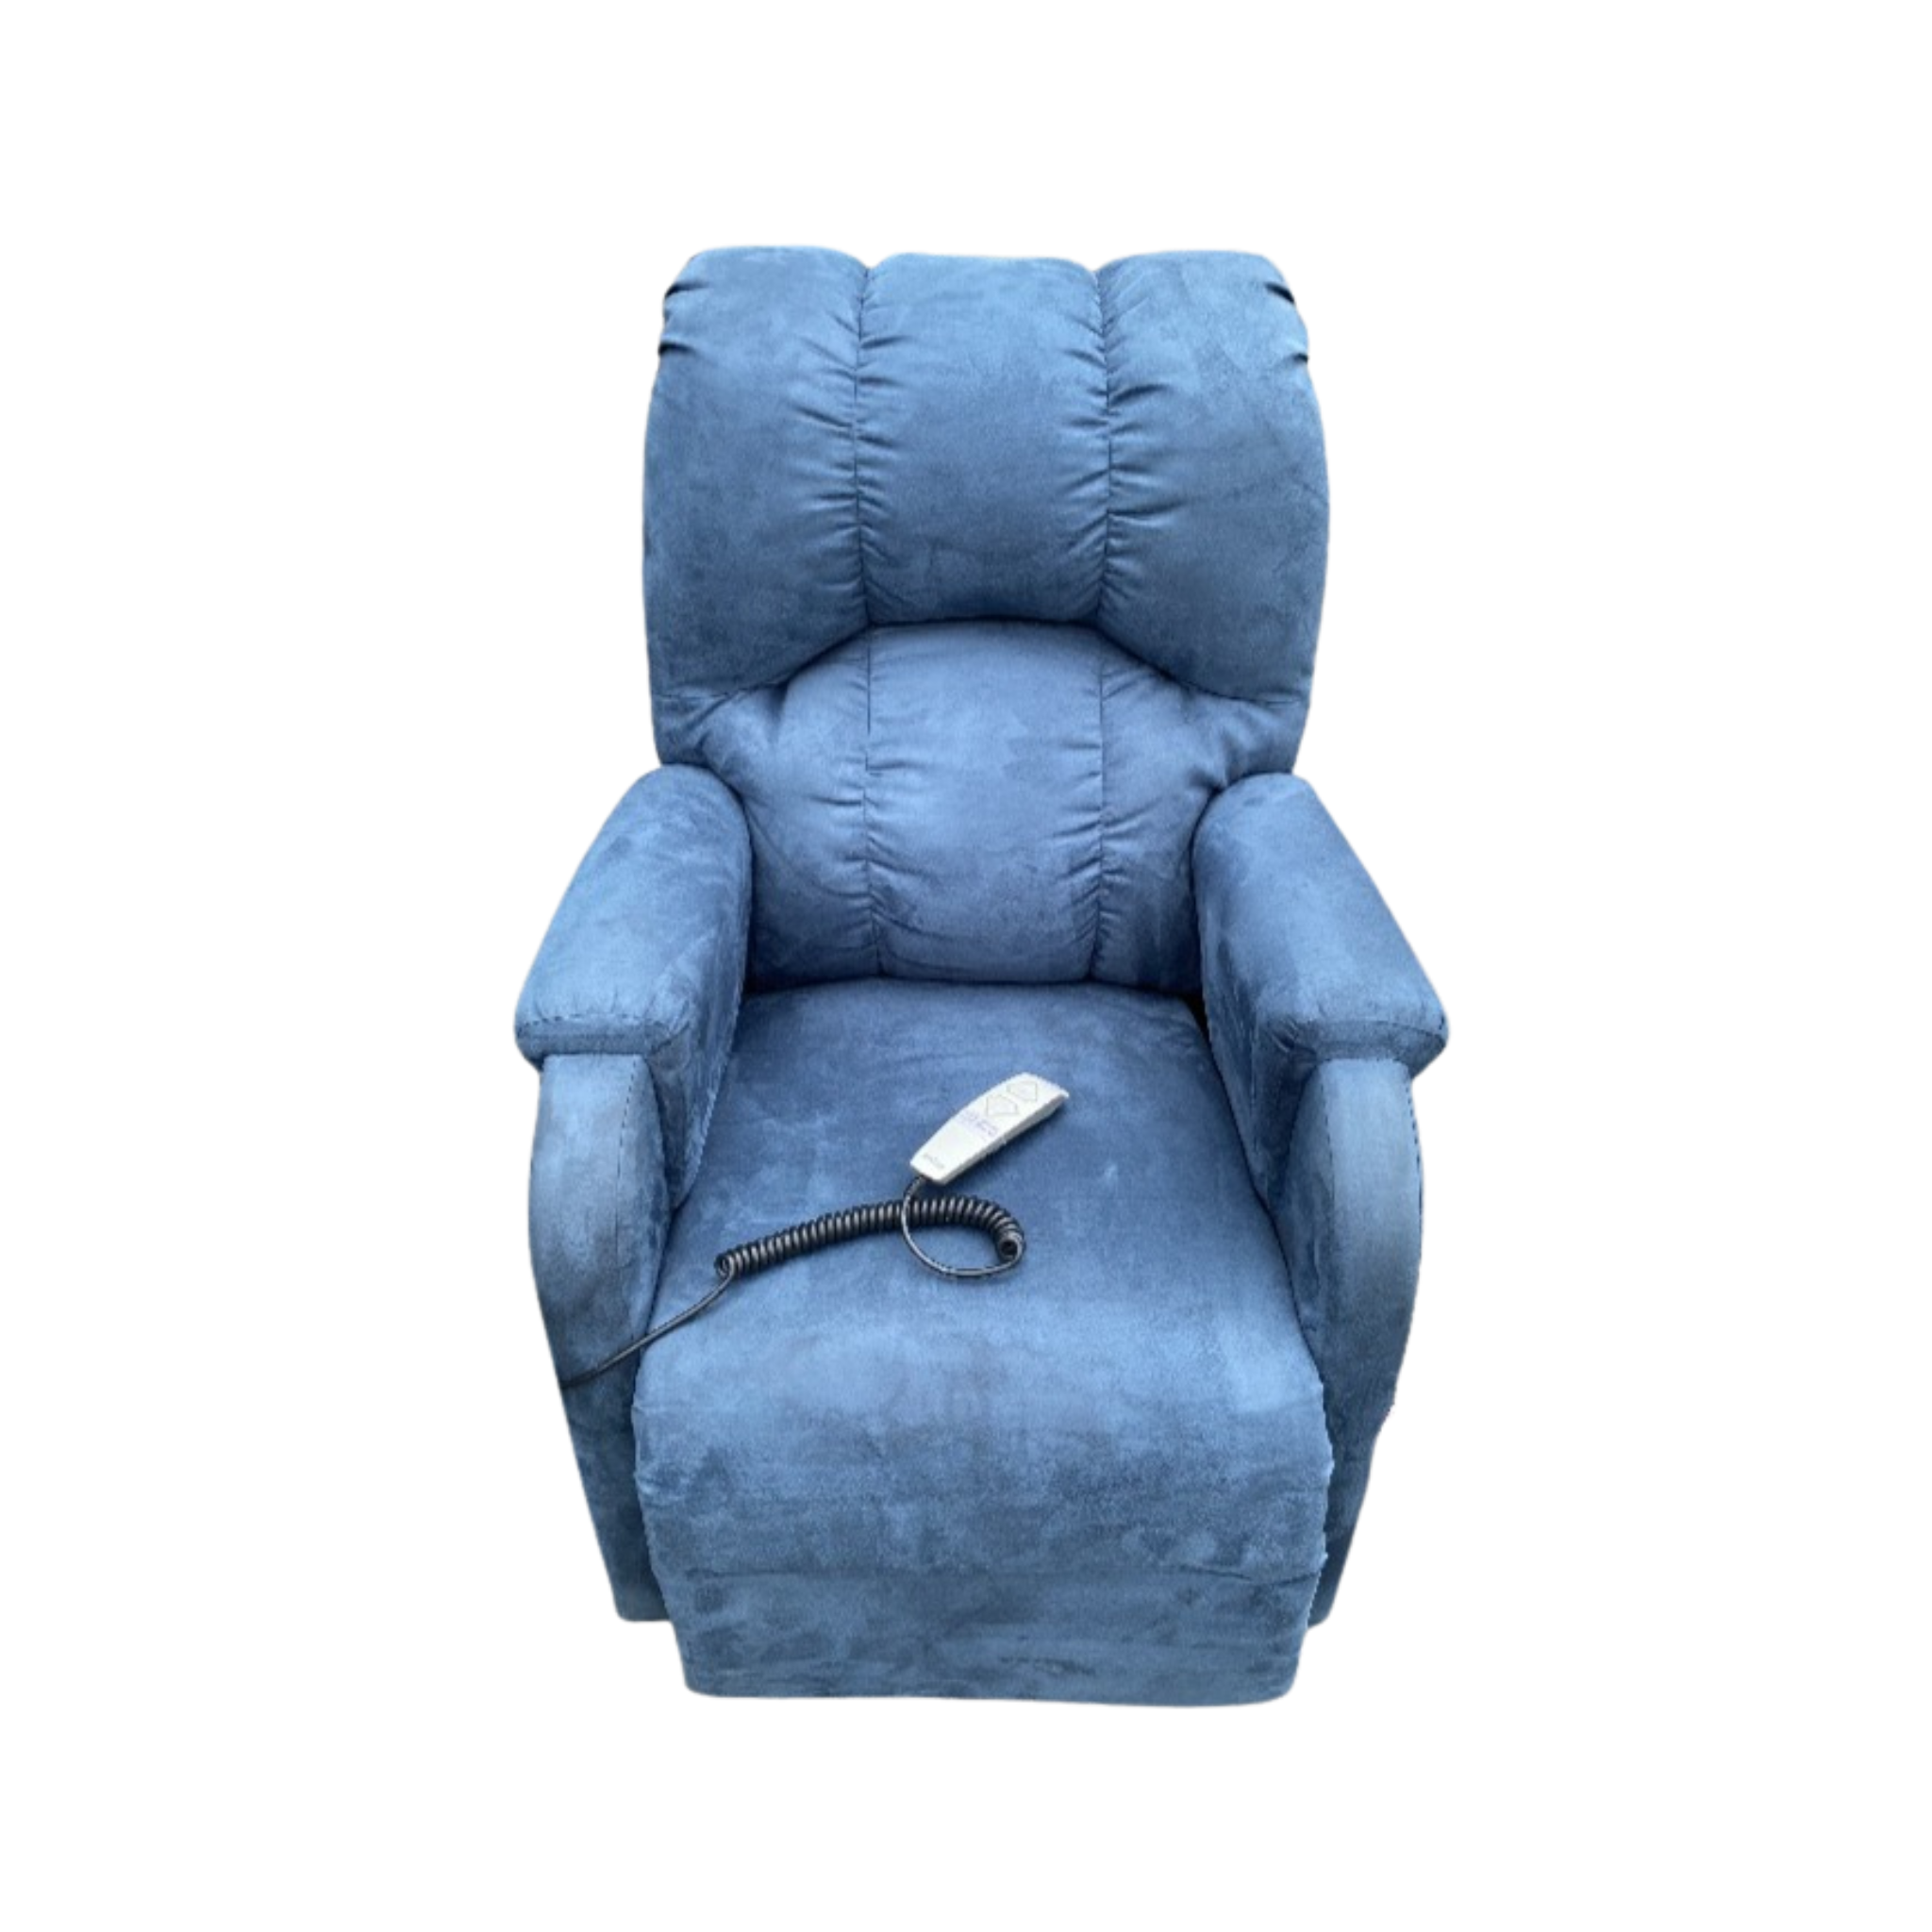 Rental - Pride C1 Rental Single Motor Lift Chair - Artic Blue Colour from Aged Care and Medical